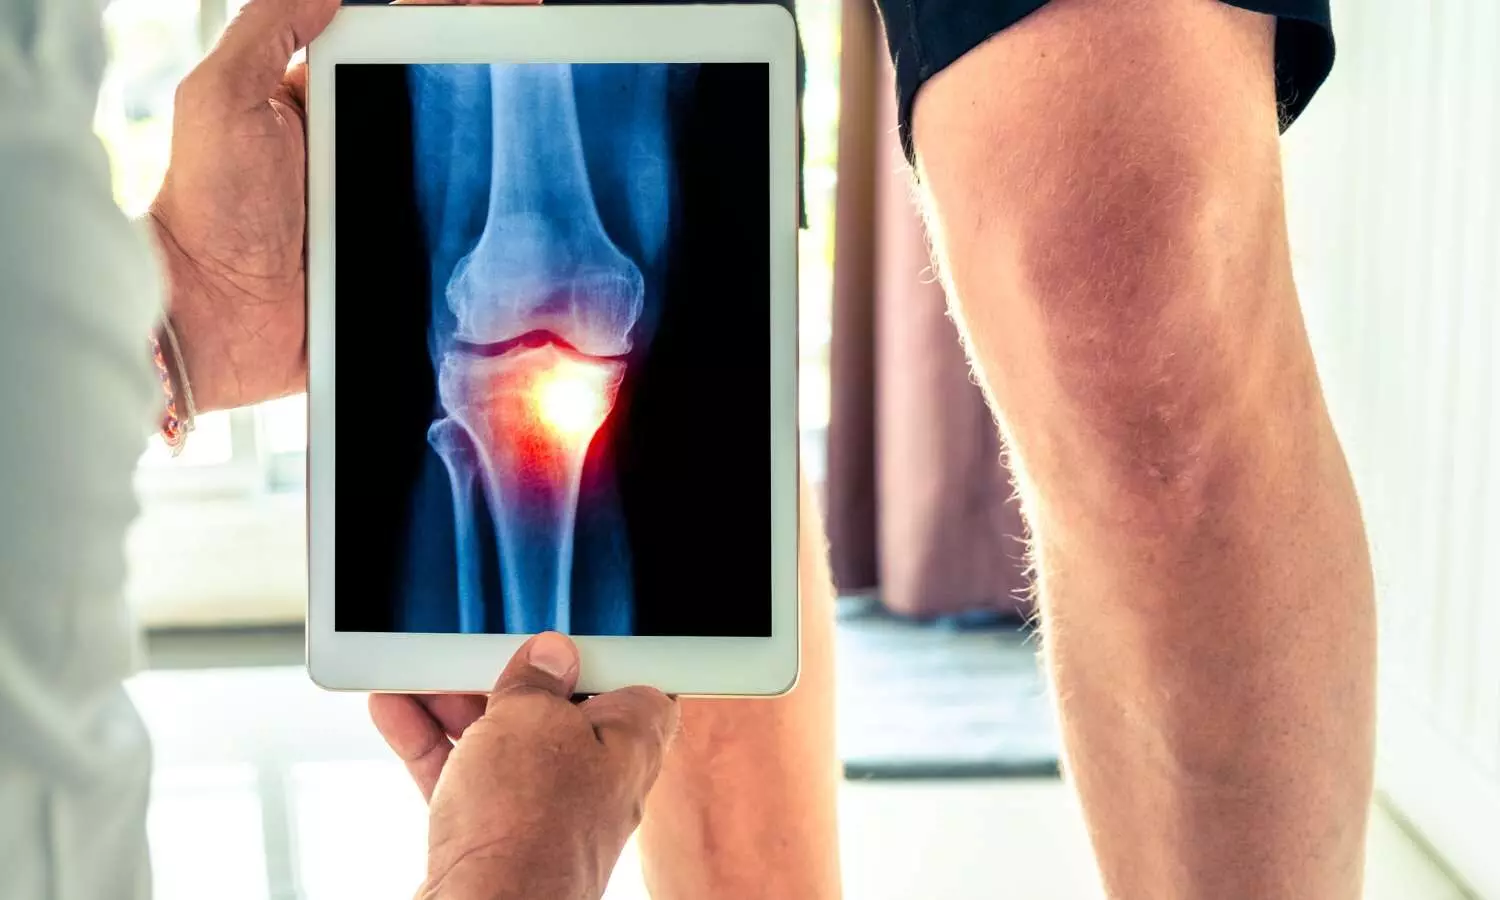 Genicular nerve block provides short-term pain relief in knee osteoarthritis: Study